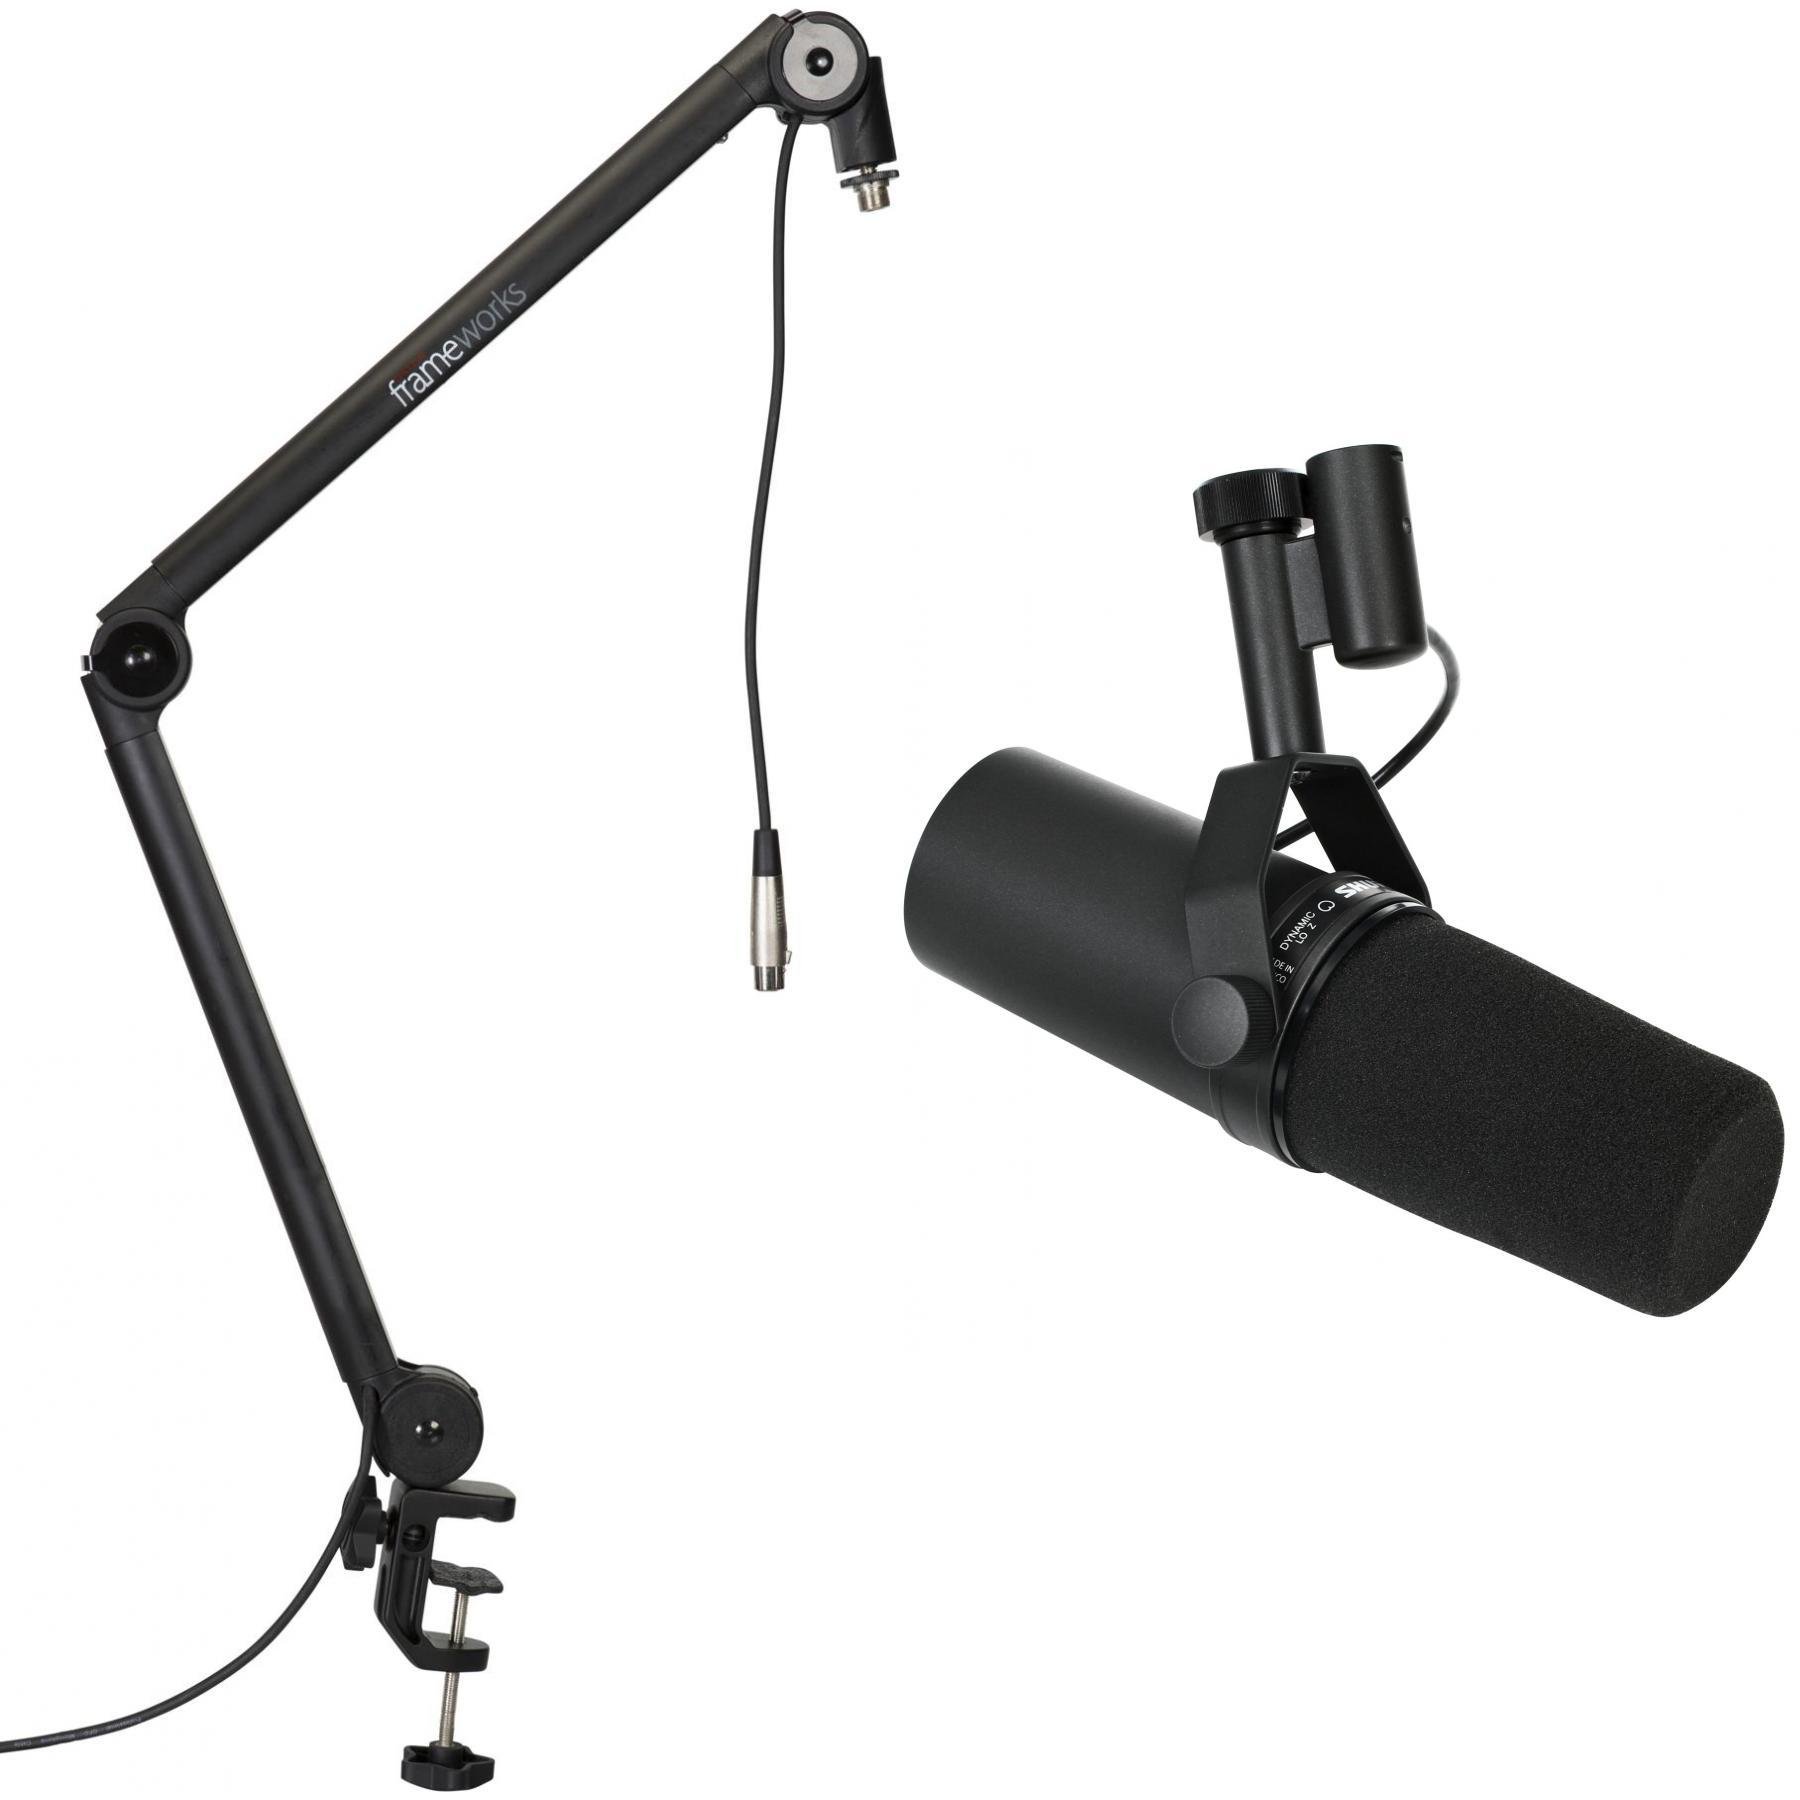 Shure SM7B Dynamic Microphone Bundle with Stand and Cable | Sweetwater